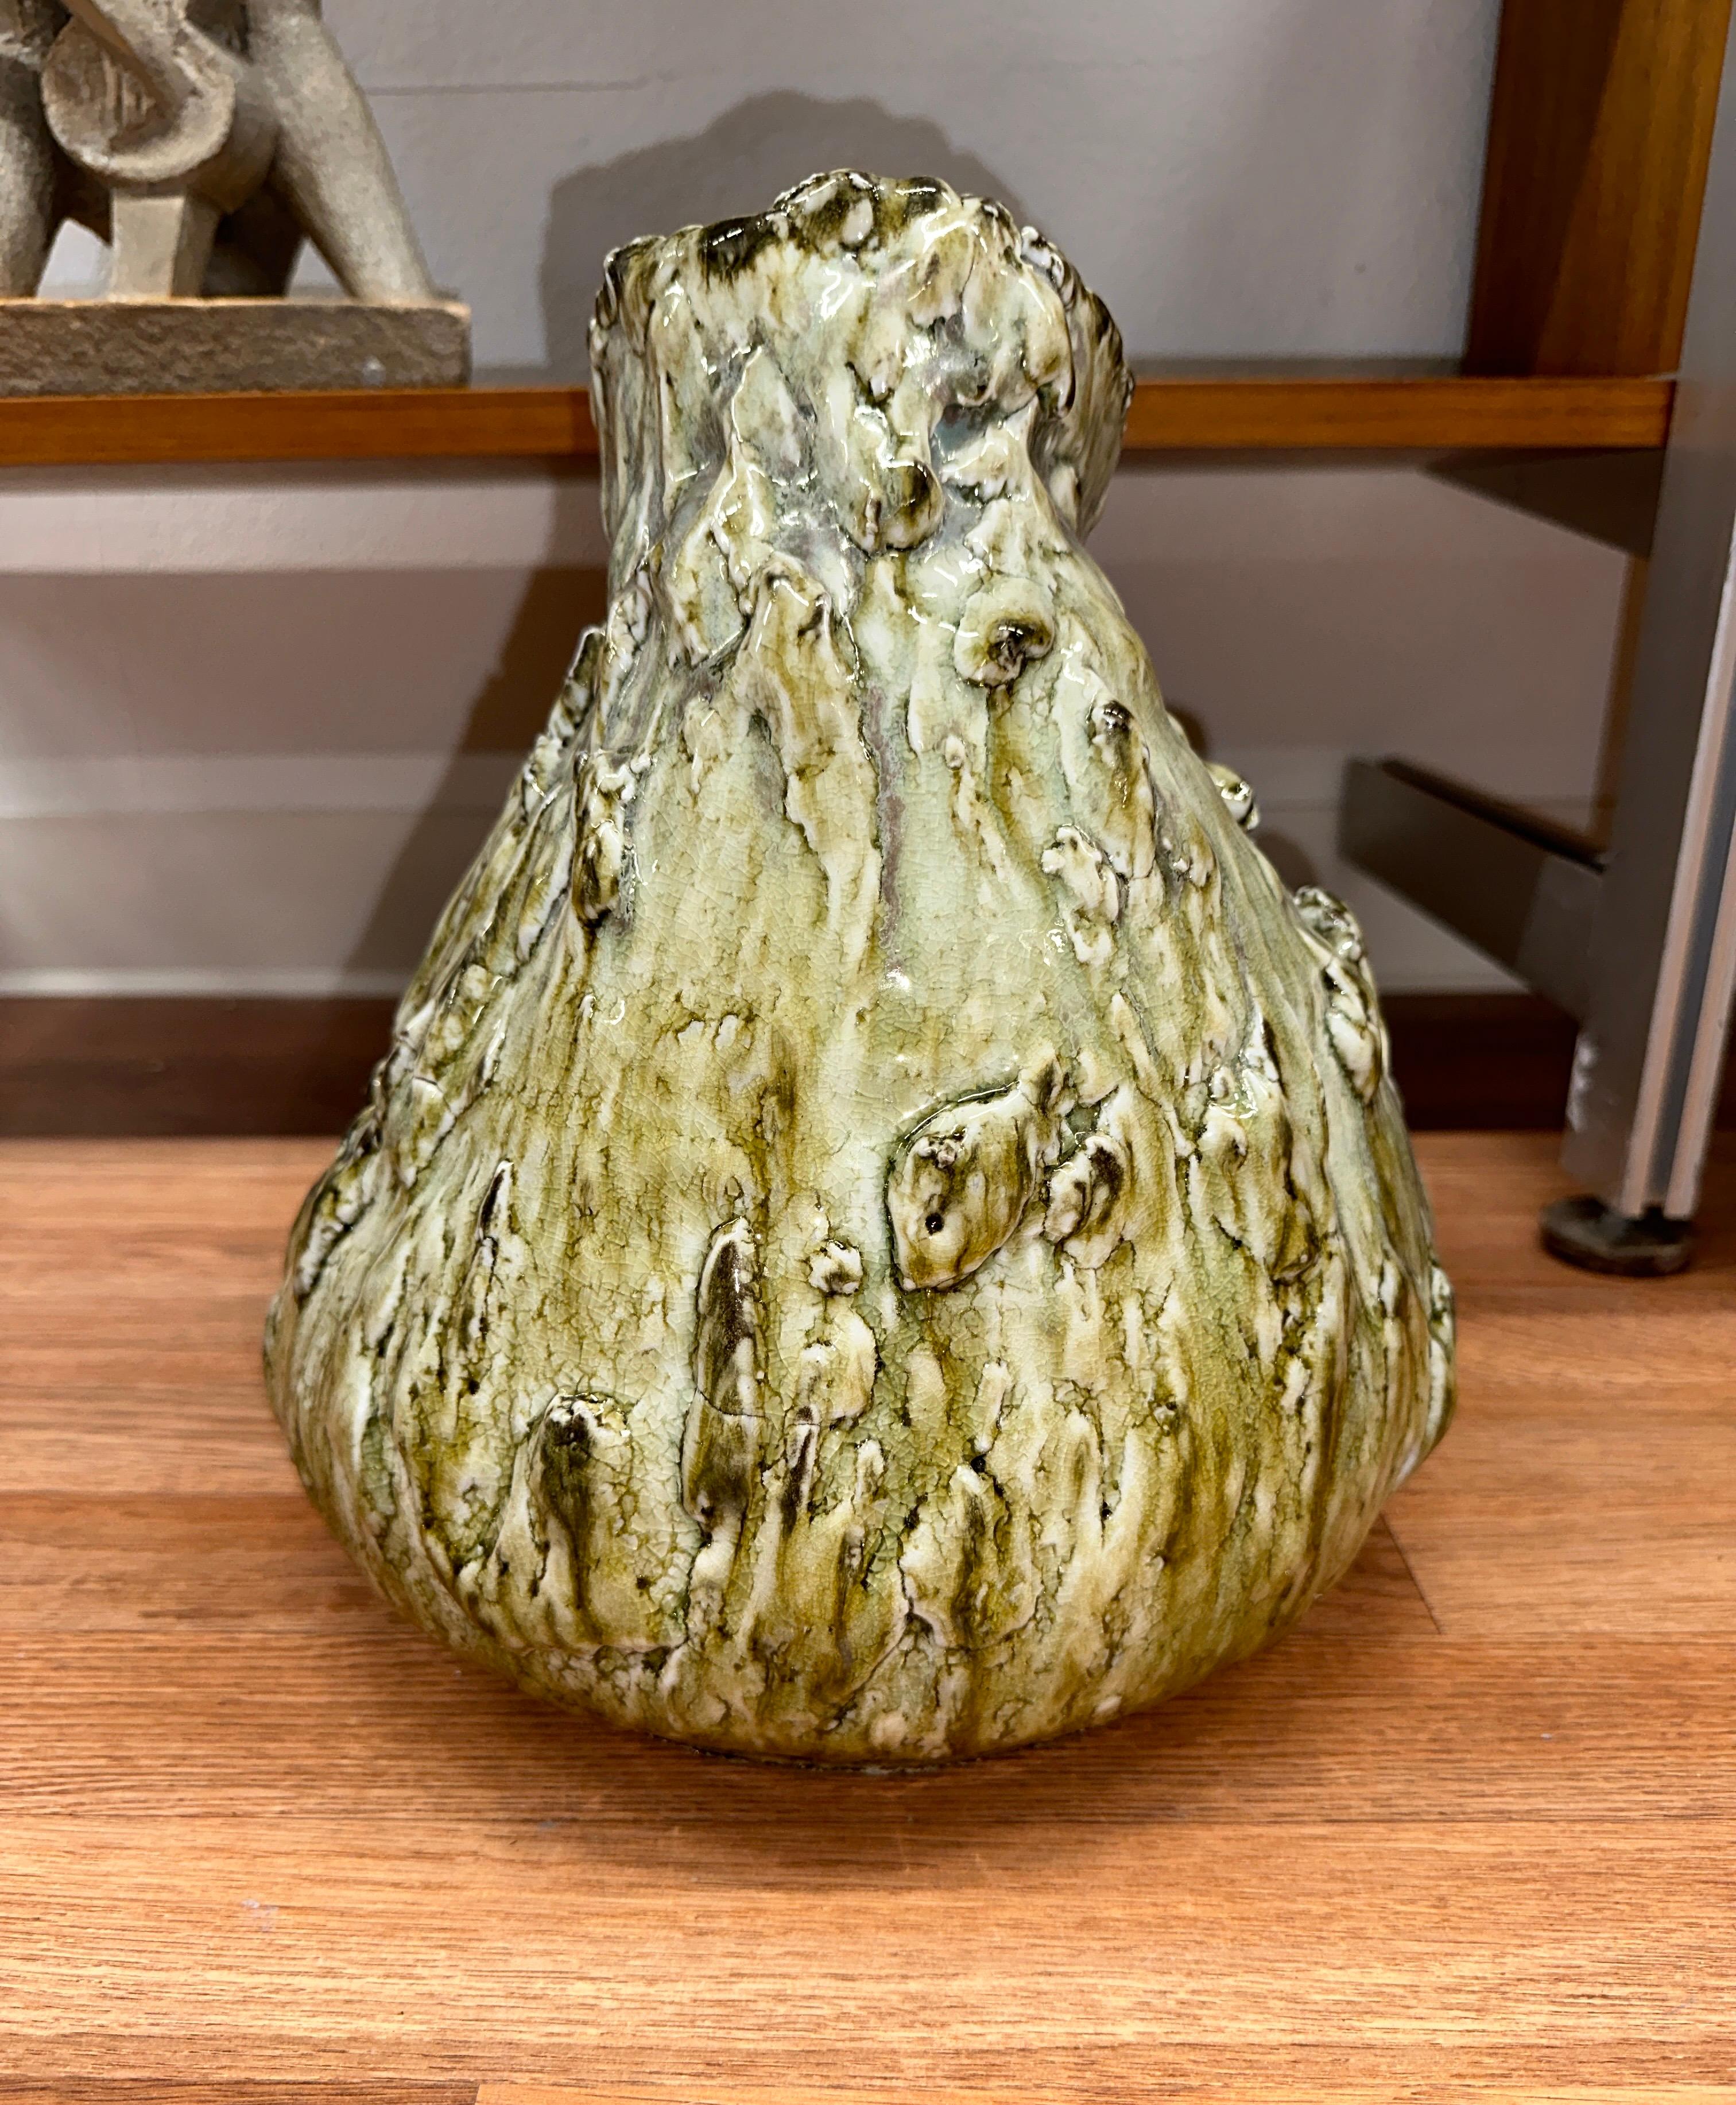 Beautifully glaze and formed piece of ceramic pottery signed Masaaki 2011 on the base. Stunning colors in shades of greens. In good condition, with some glaze imperfections inherent to the firing process. 